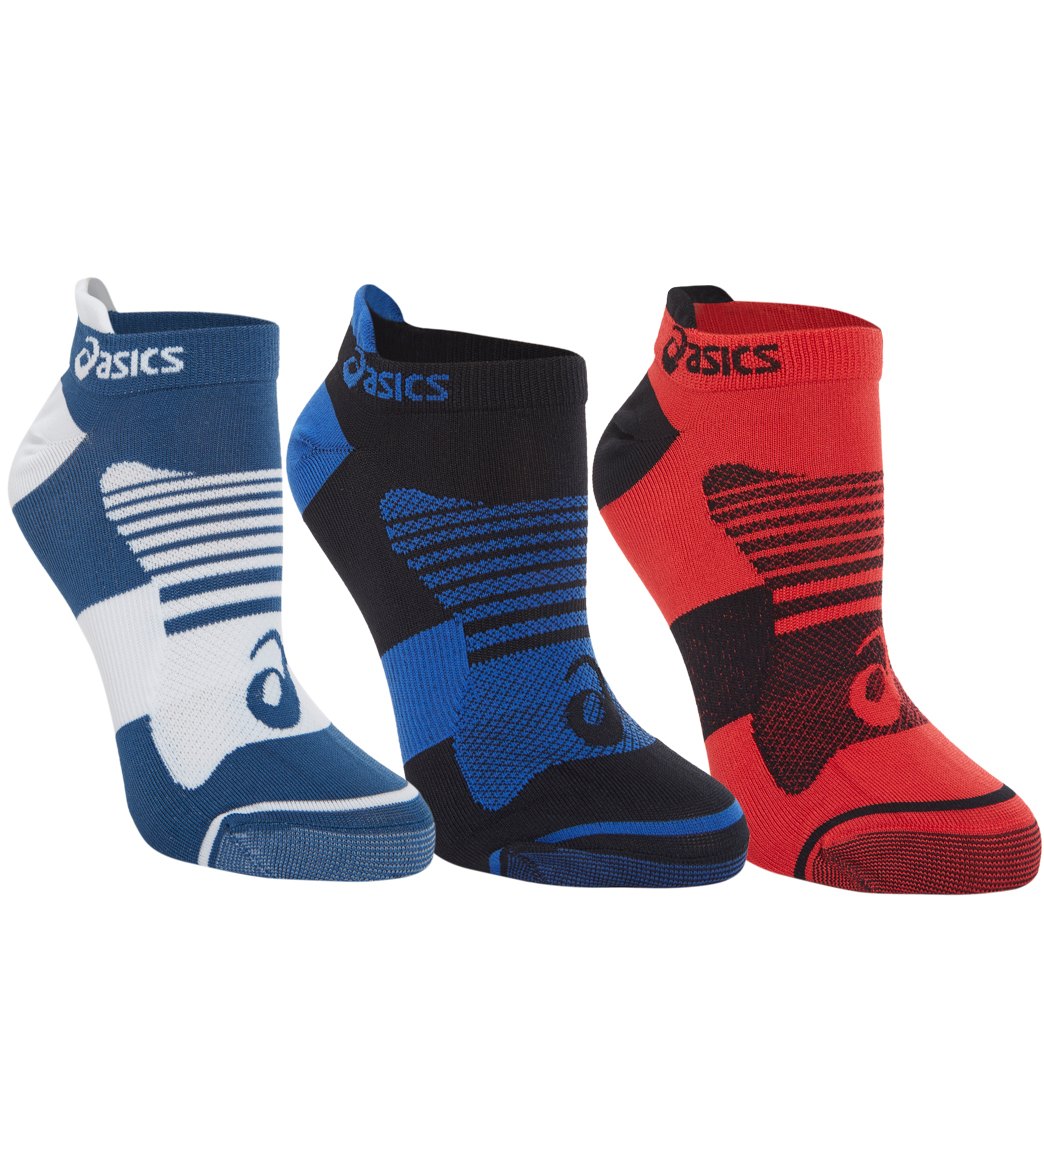 Men's Quick Lyte Plus Socks 3 Pack - Performance Black/ Blue/Speed Red Small Black/Asics Size Small - Swimoutlet.com